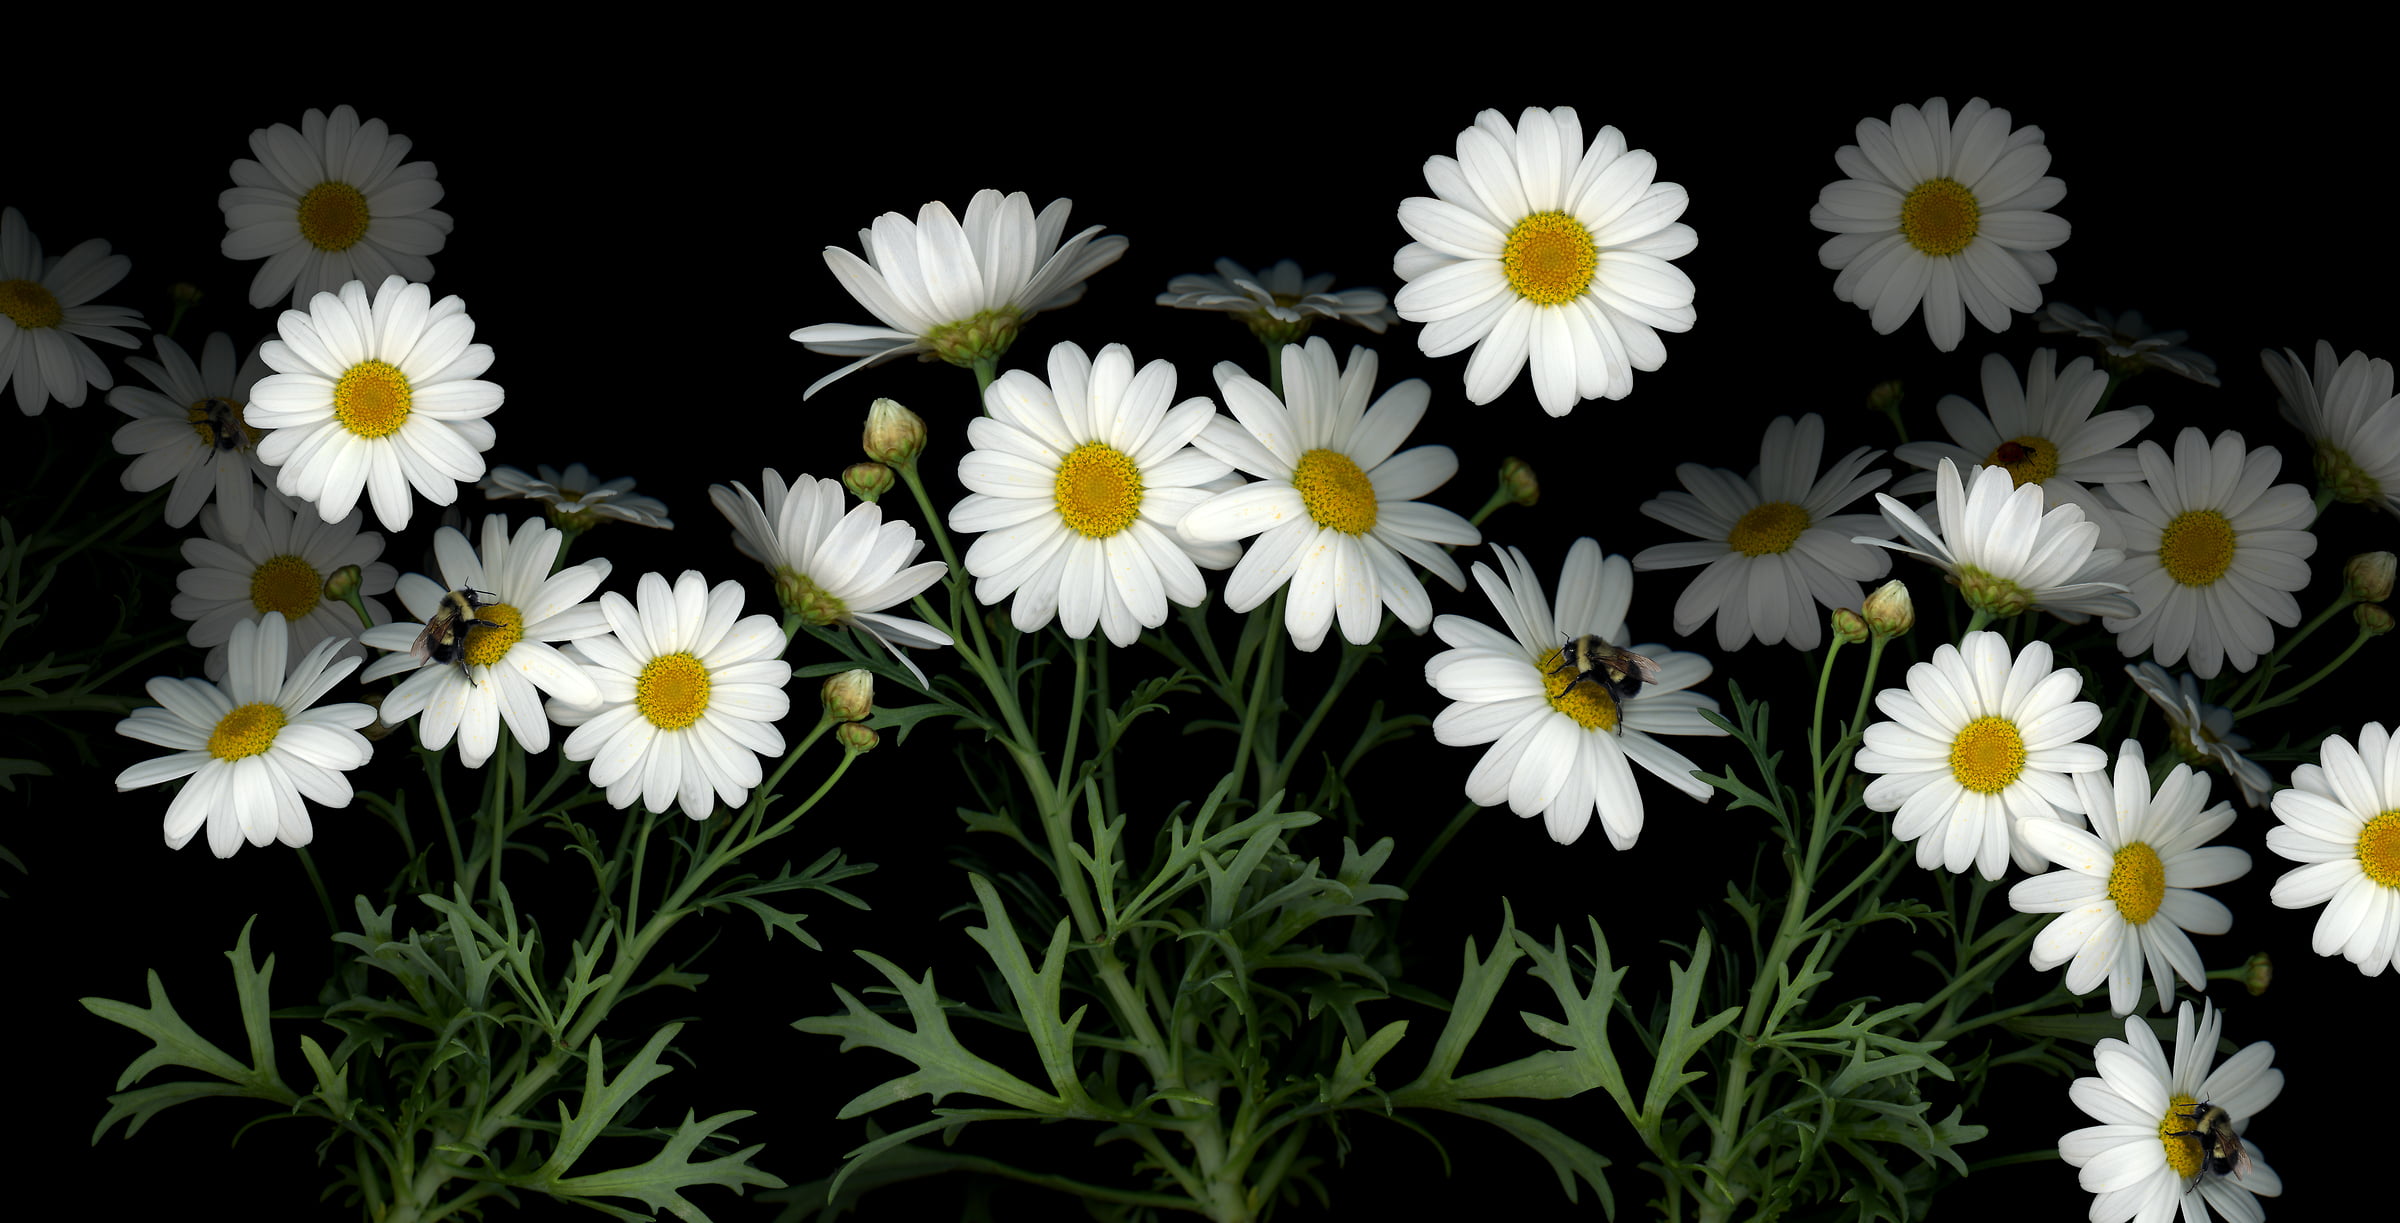 727 megapixels! A very high resolution, large-format VAST photo print of daisy flowers with bumble bees; photograph created by Anja Axelsson.